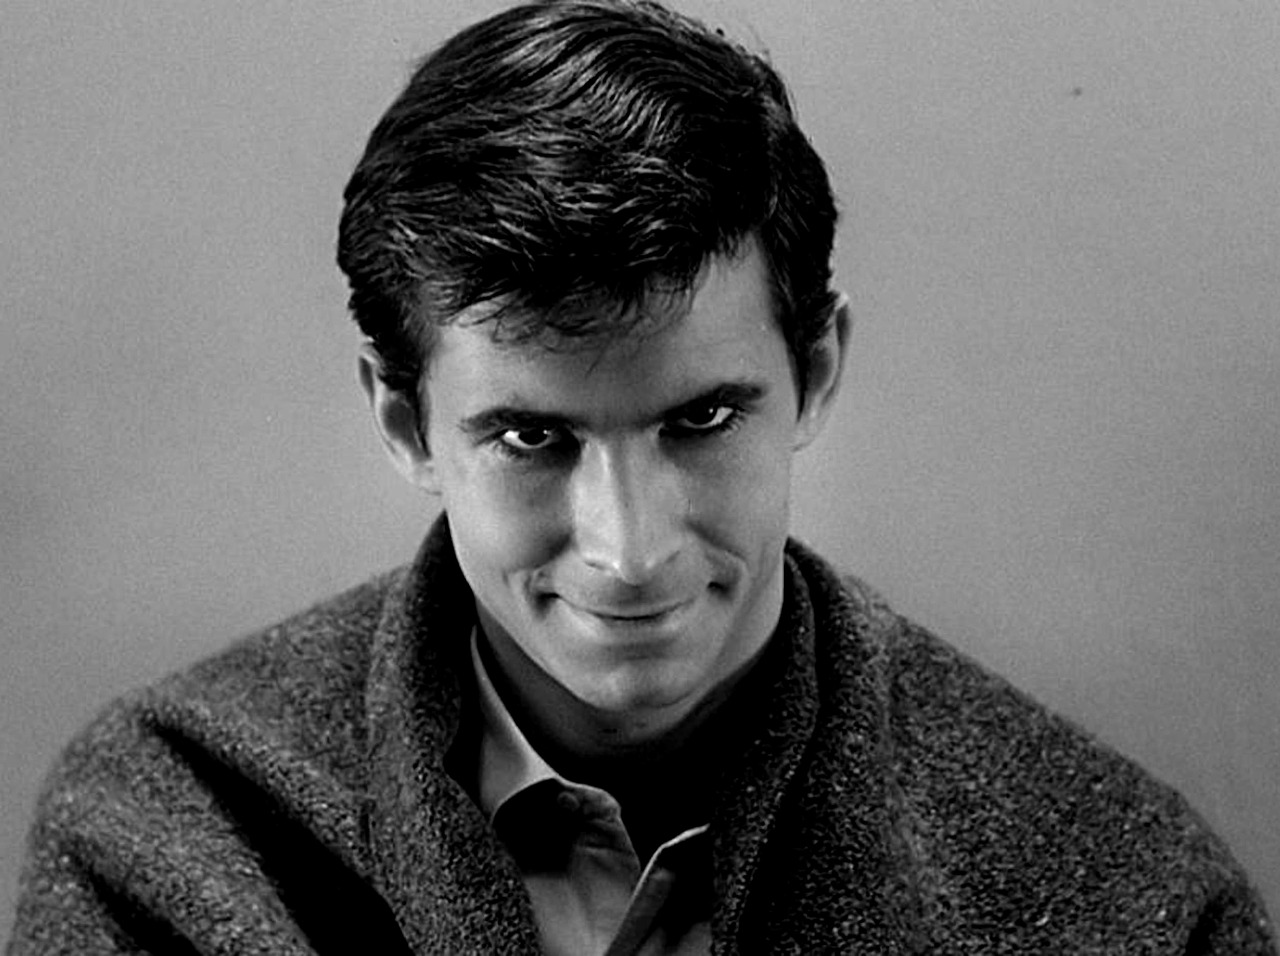 Anthony Perkins in "Psycho"